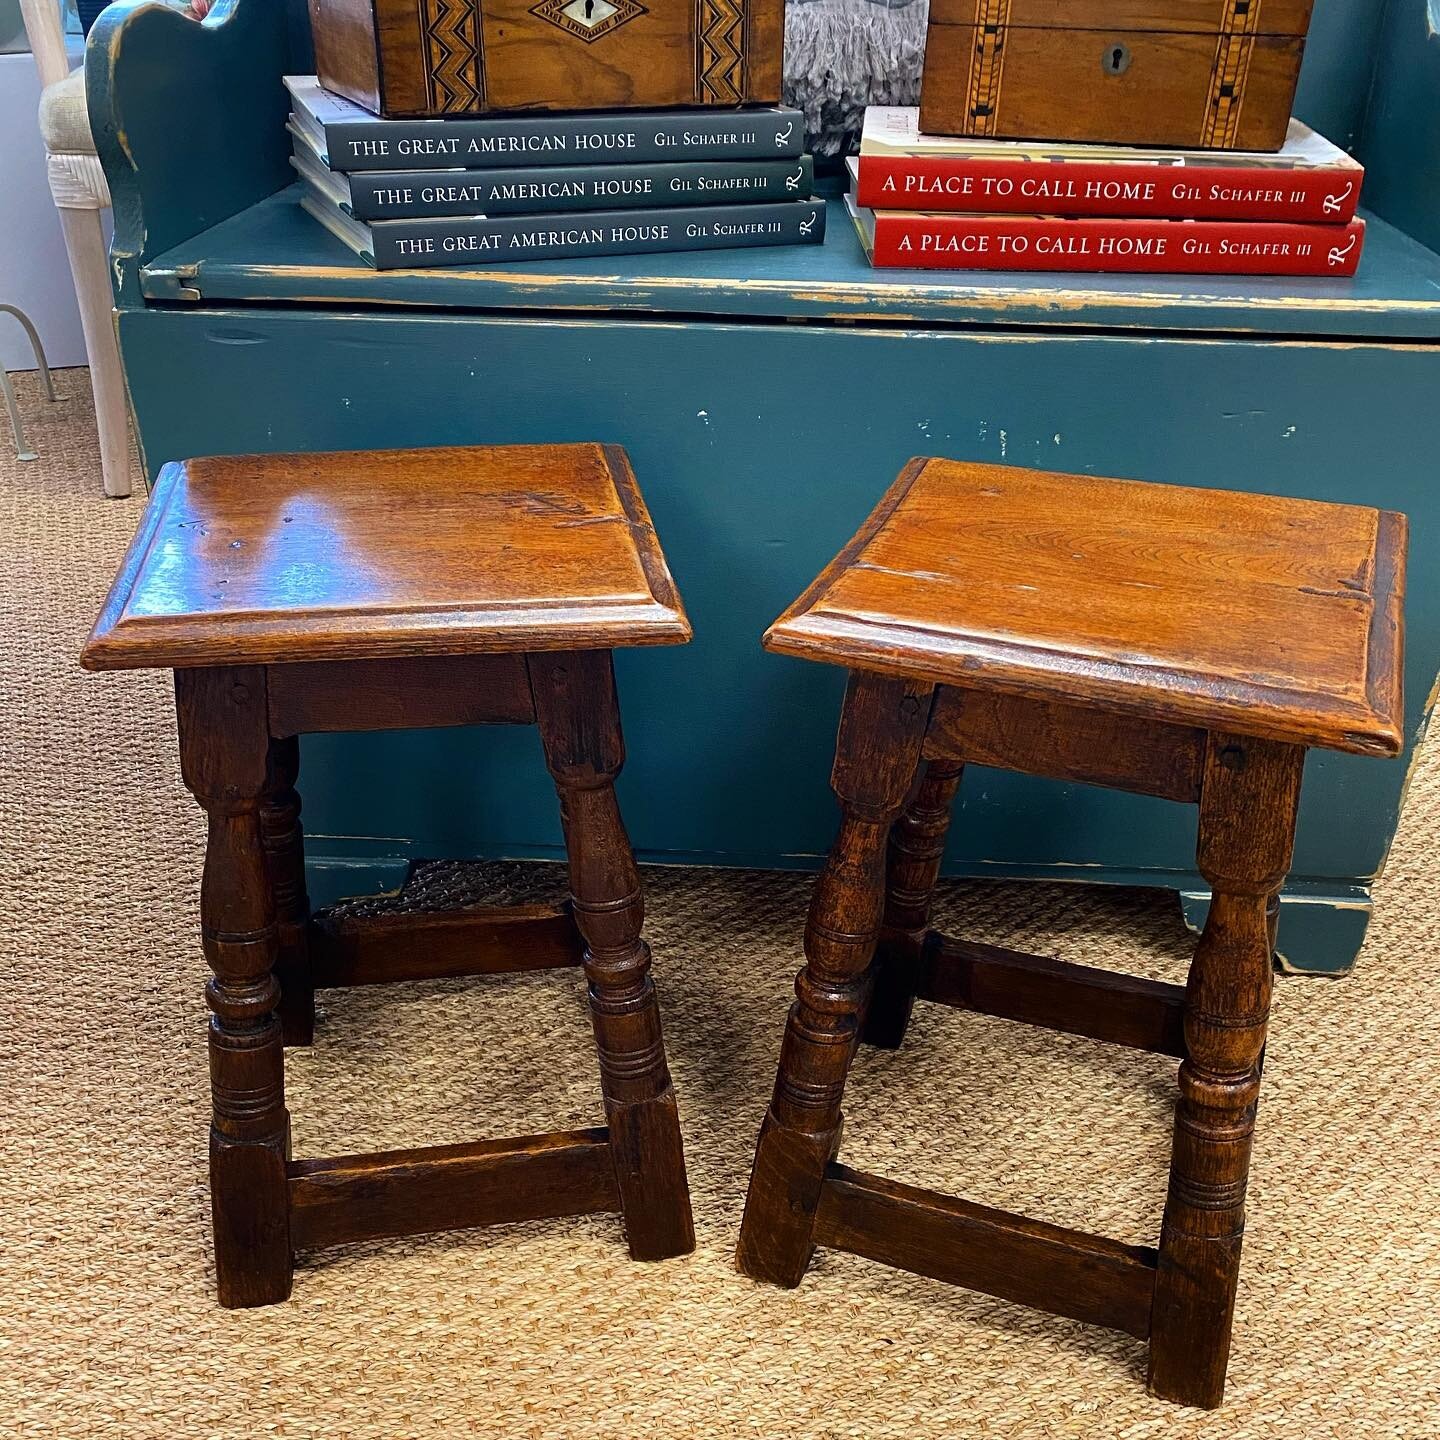 From our NEW SHIPMENT&hellip;Love these little Antique Joint Stools.  DM @westendaugusta or text/call 706-830-9641 for further info. #antiques #antiquedealersofinstagram #jointstool #antiquejointstool